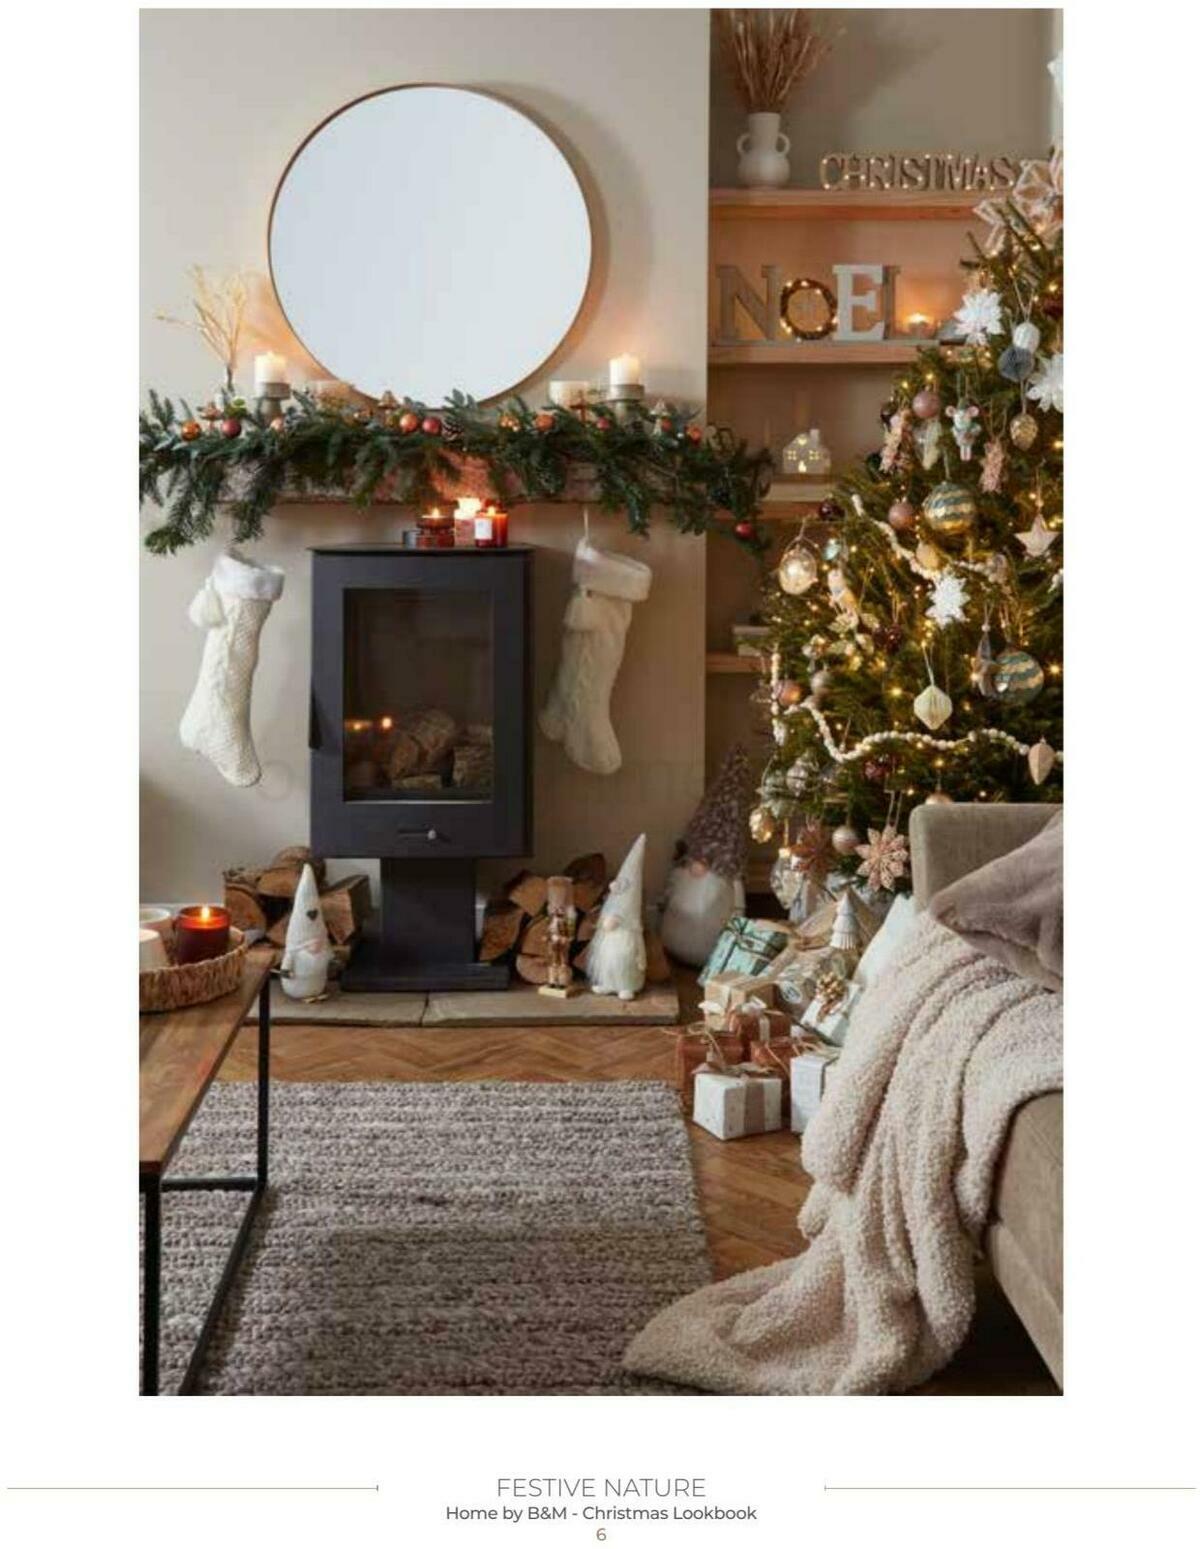 B&M Christmas Home Offers from 5 November